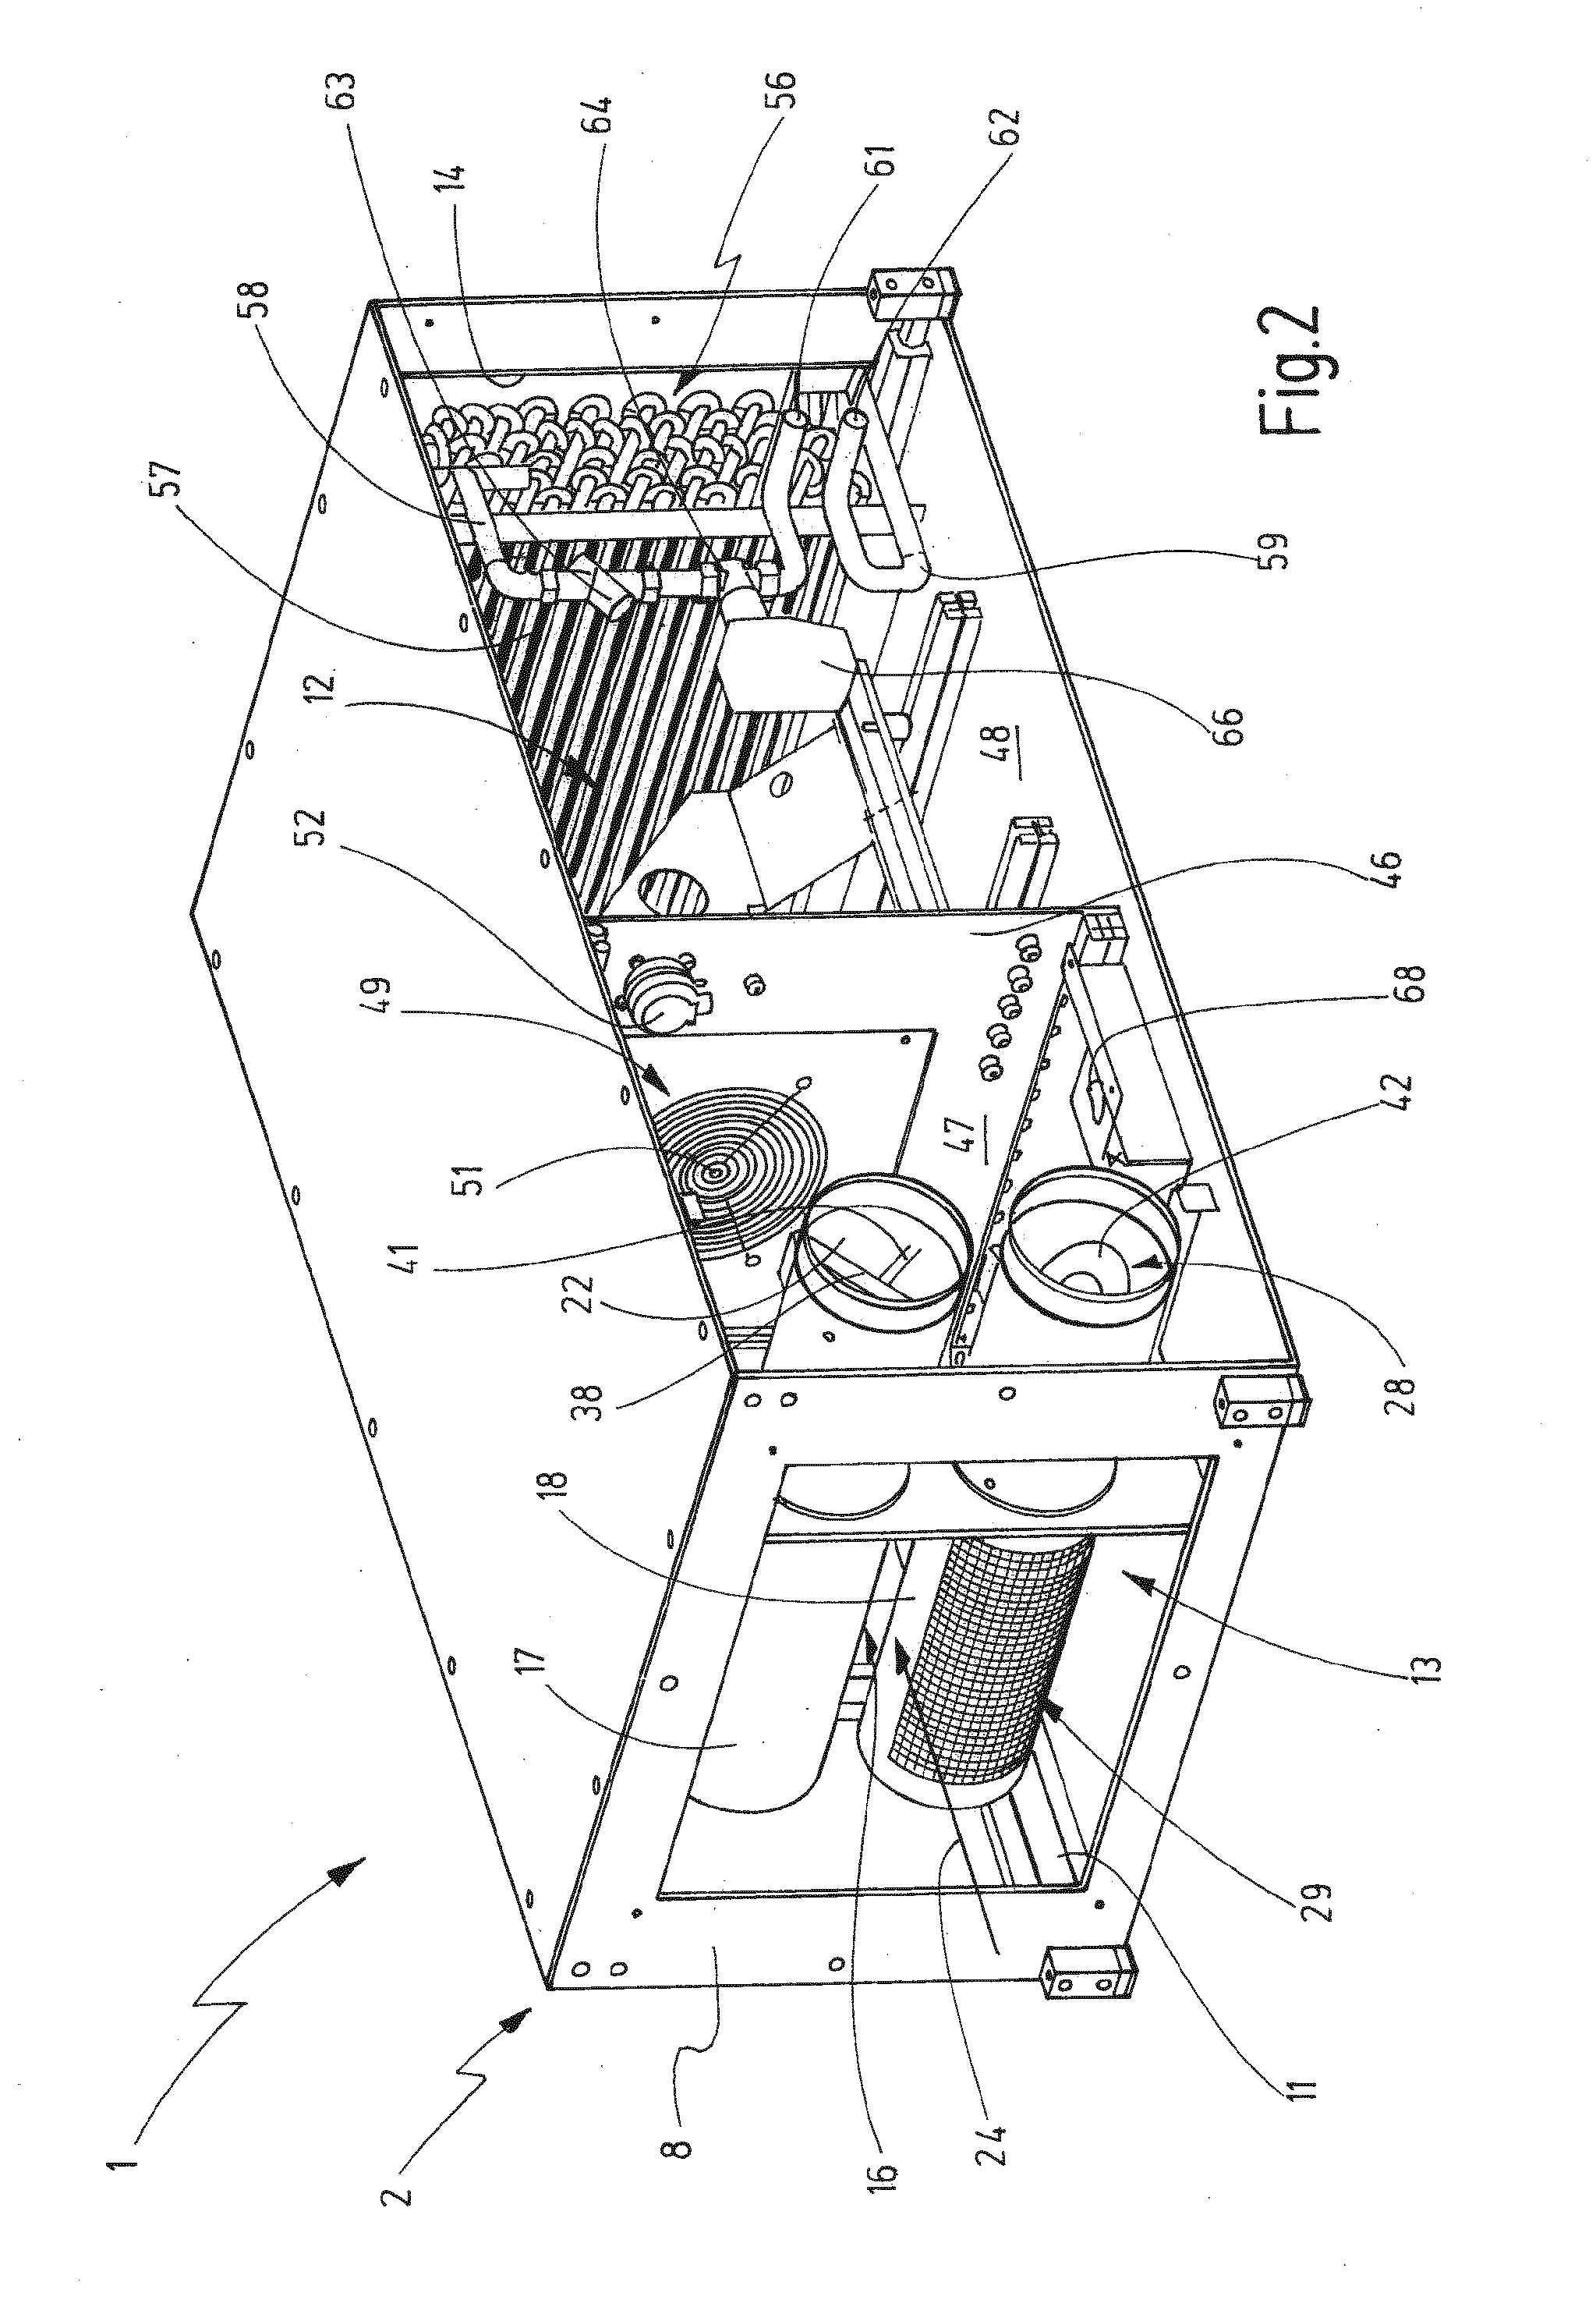 Ventilation device for clean room applications